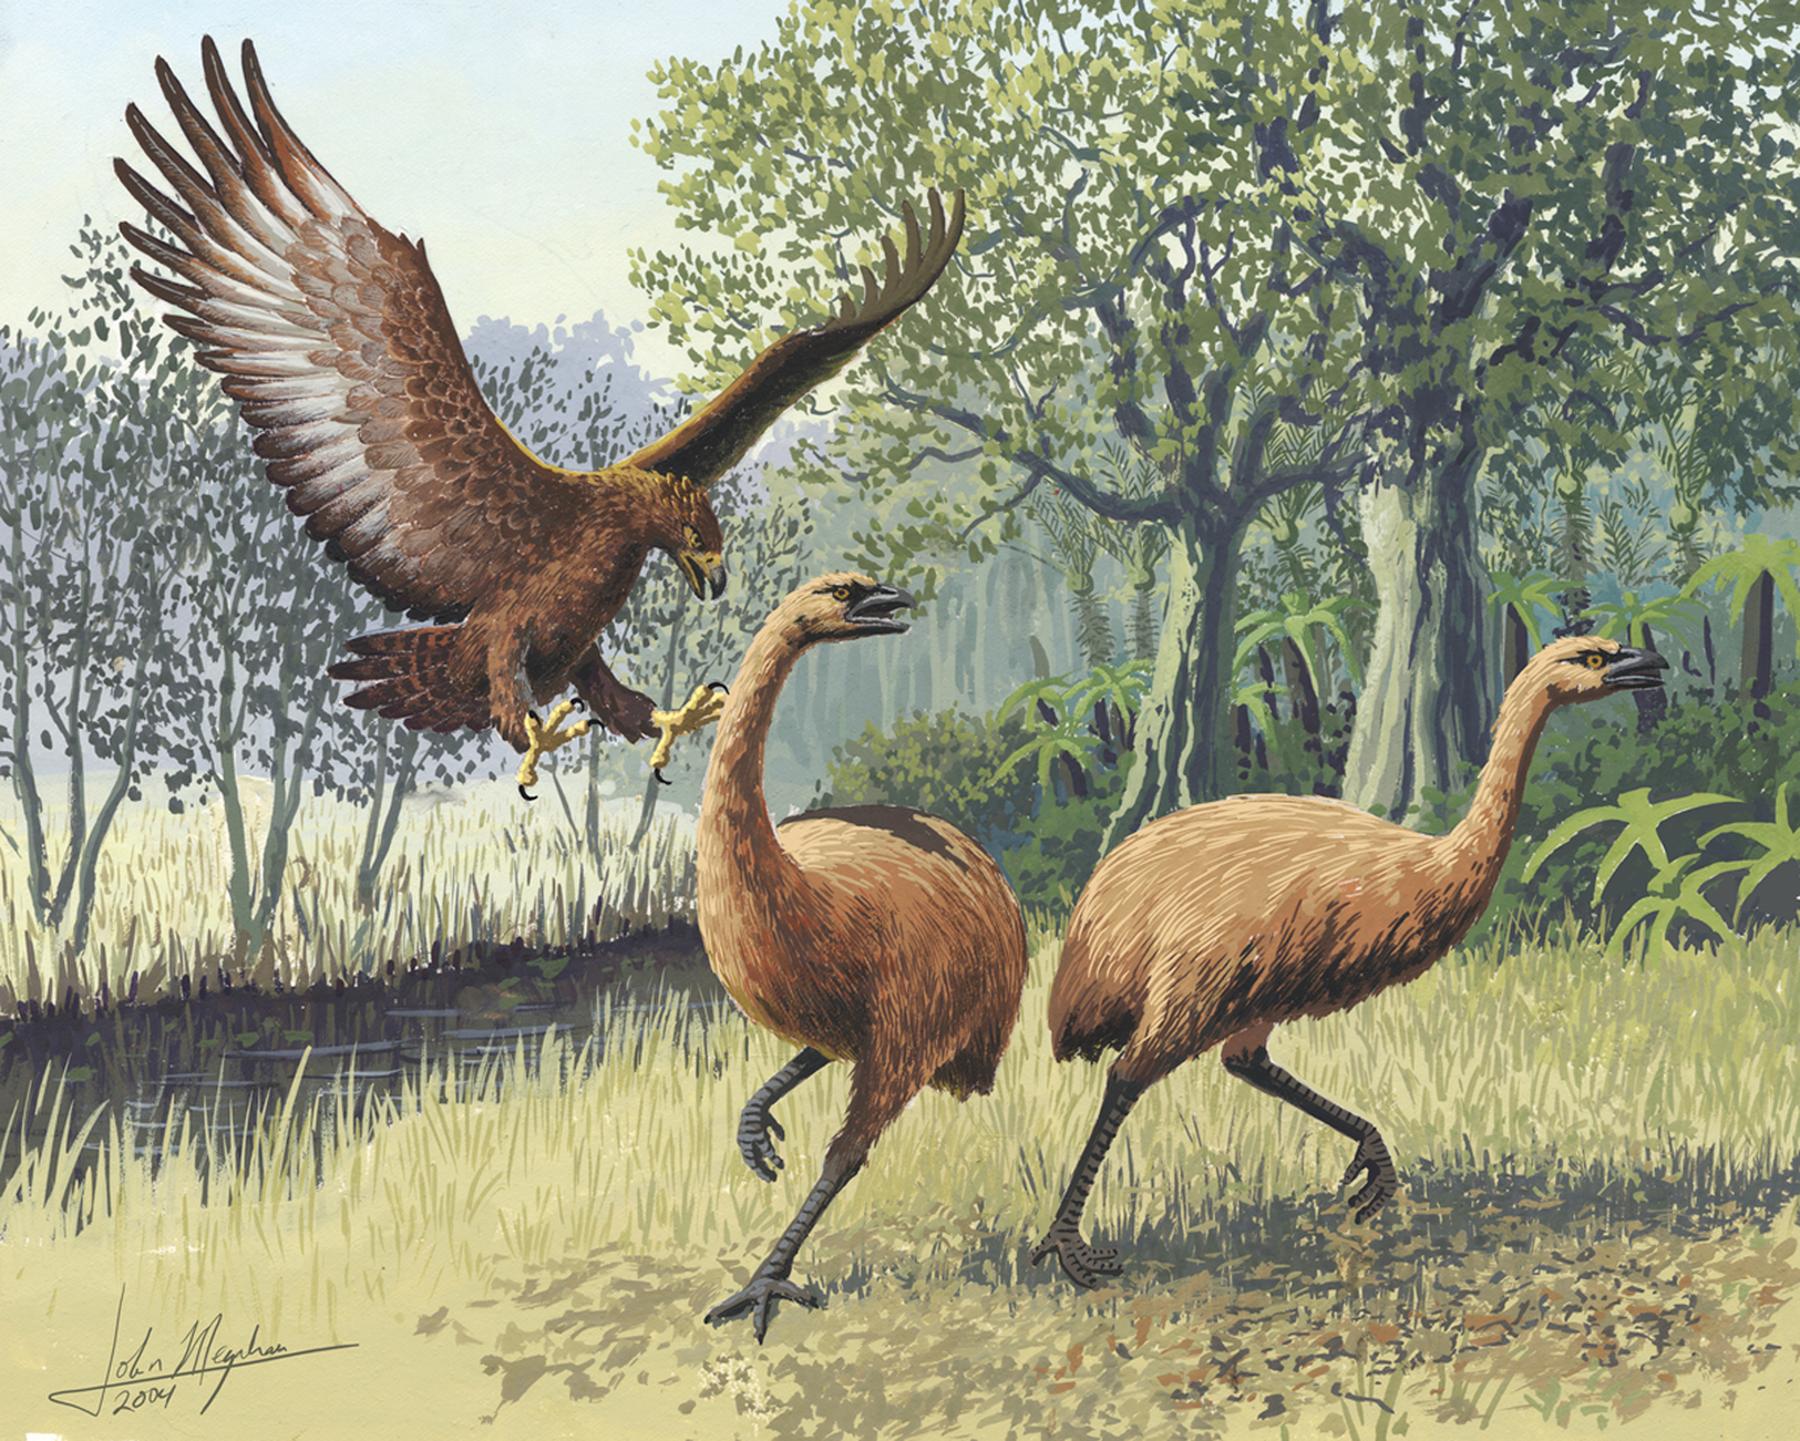 File:Giant Haasts eagle attacking New Zealand moa.jpg - Image of The featured image should contain a